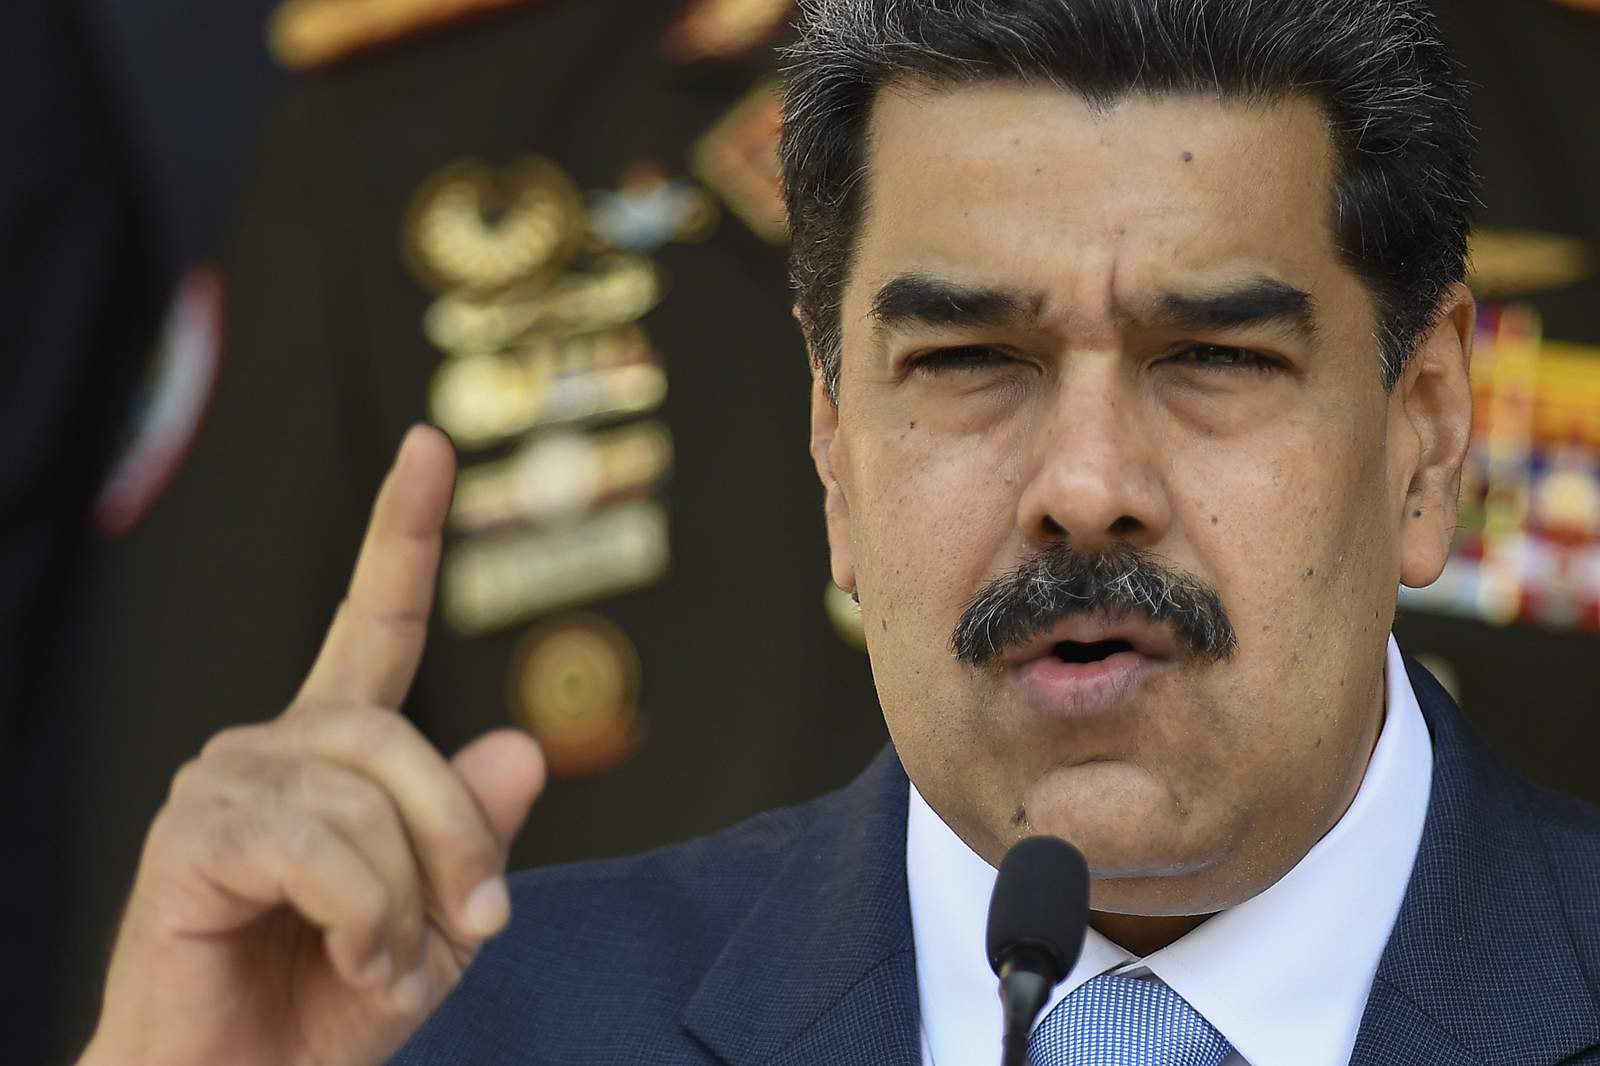 A defiant Maduro threatens 'cowboy' Trump after drug charge